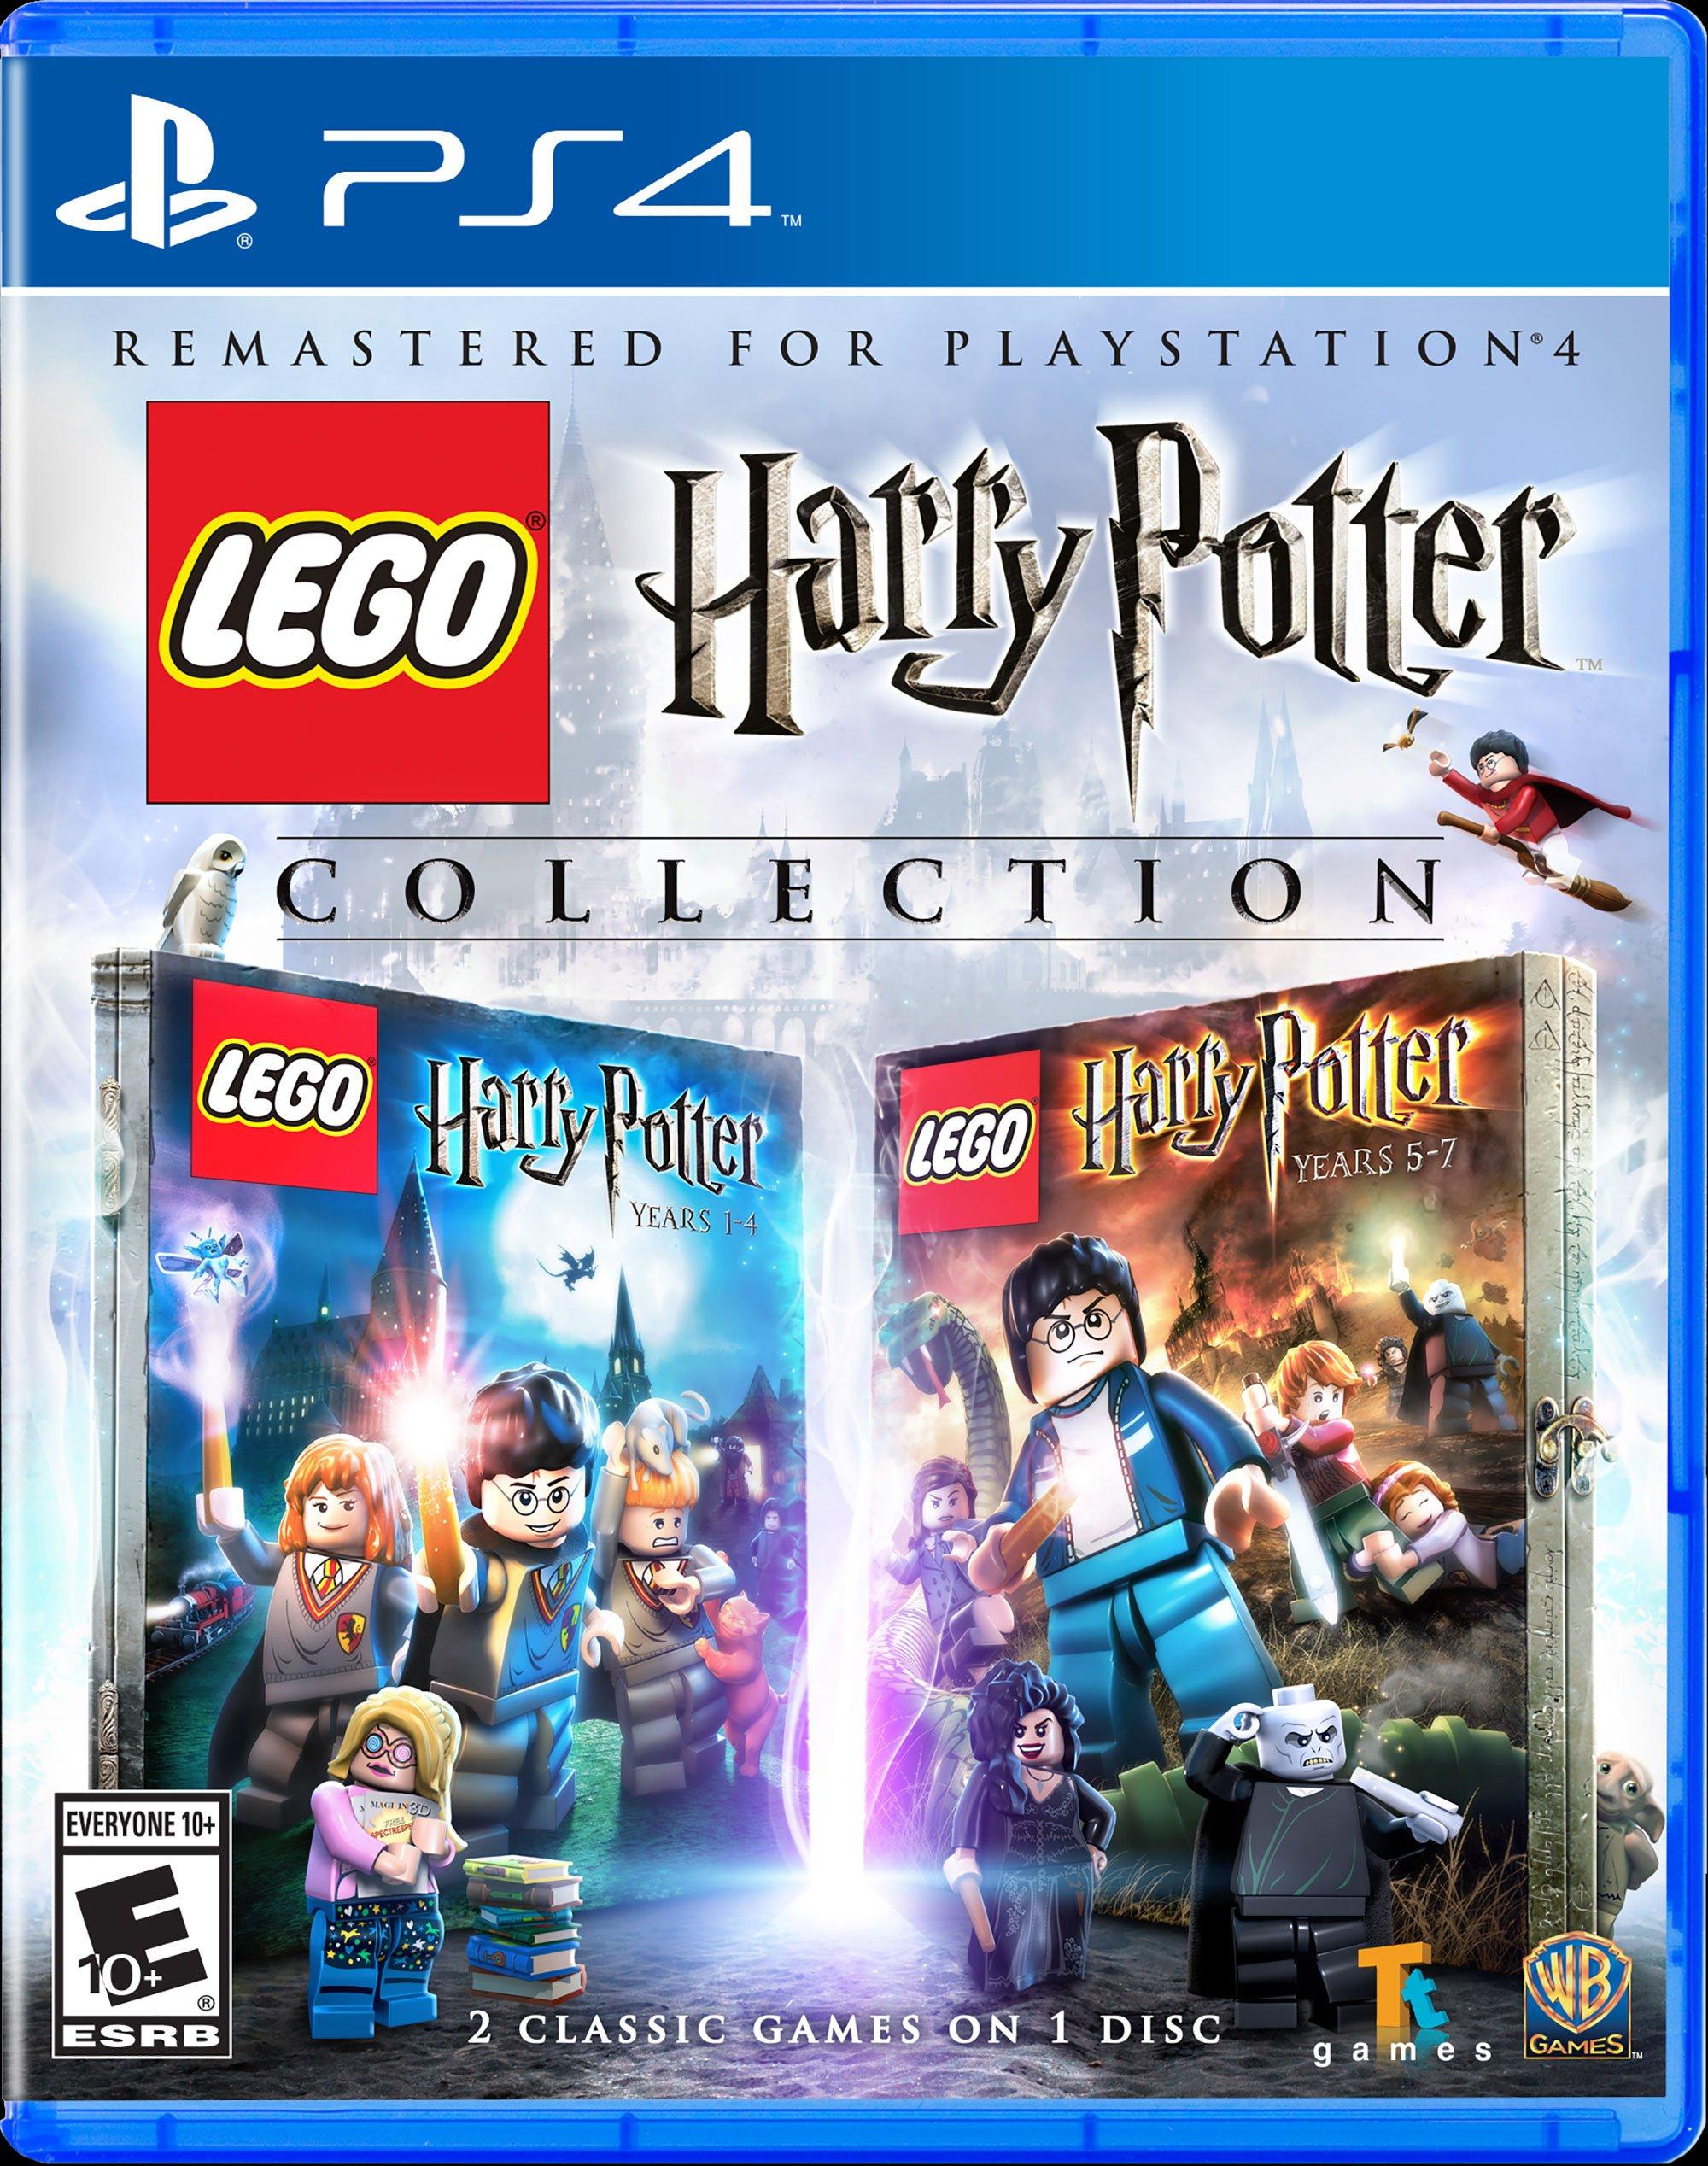 militie factor Namaak LEGO Harry Potter Collection - PlayStation 4 | PlayStation 4 | GameStop